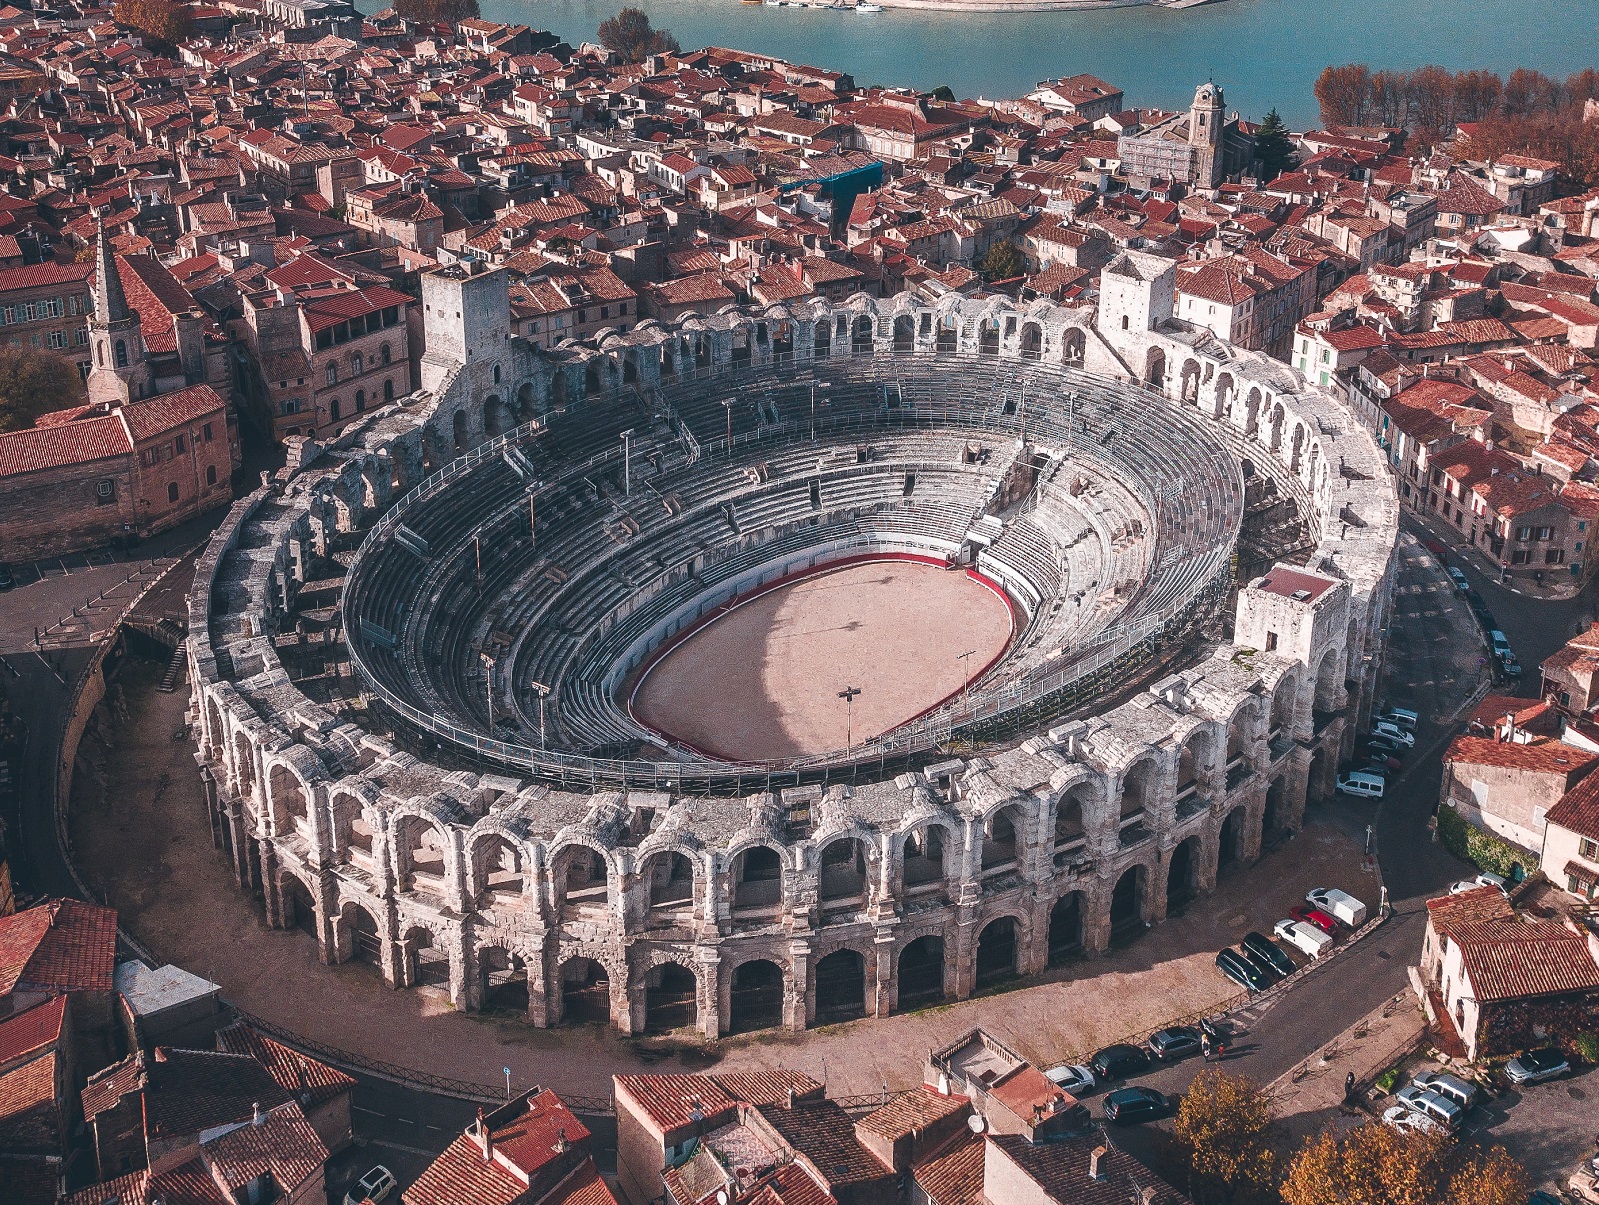 The amphitheatre at Arles, captured by Lucas Miguel